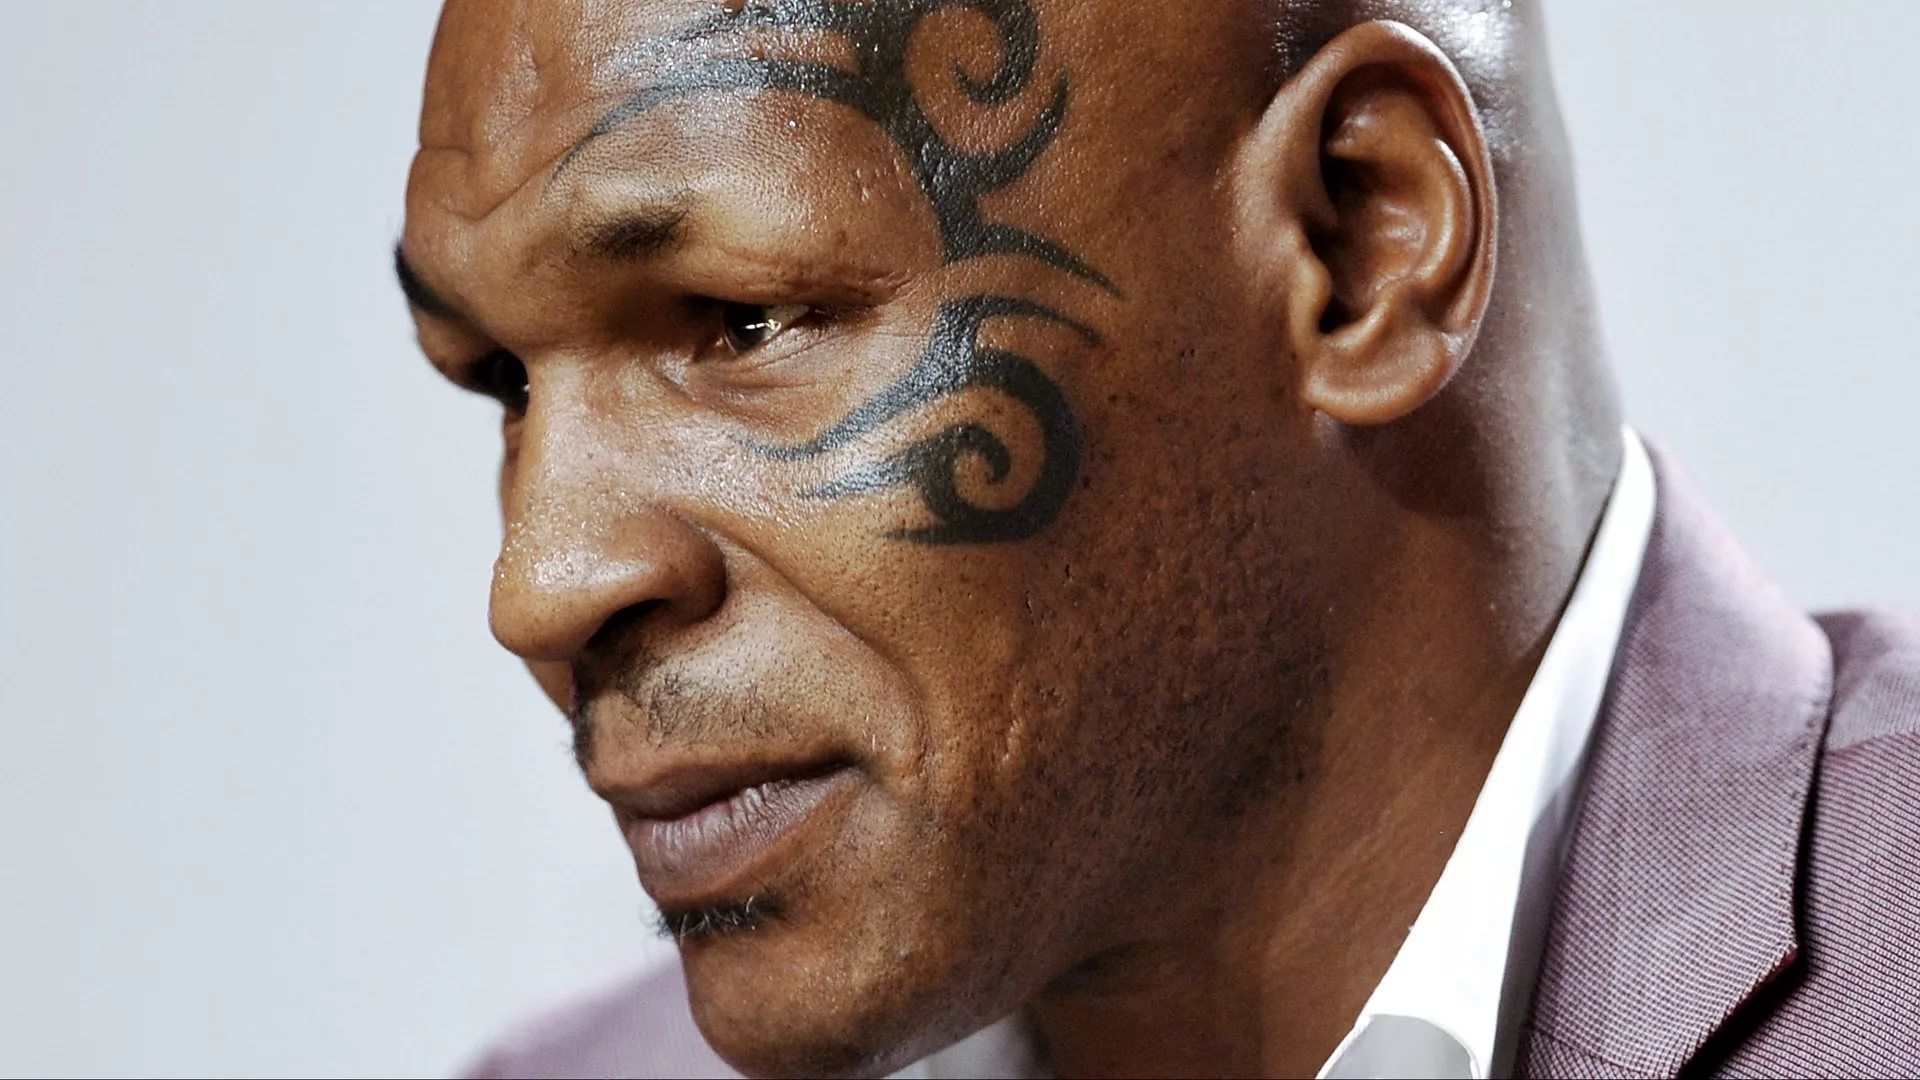 Mike Tyson wallpaper picture hd